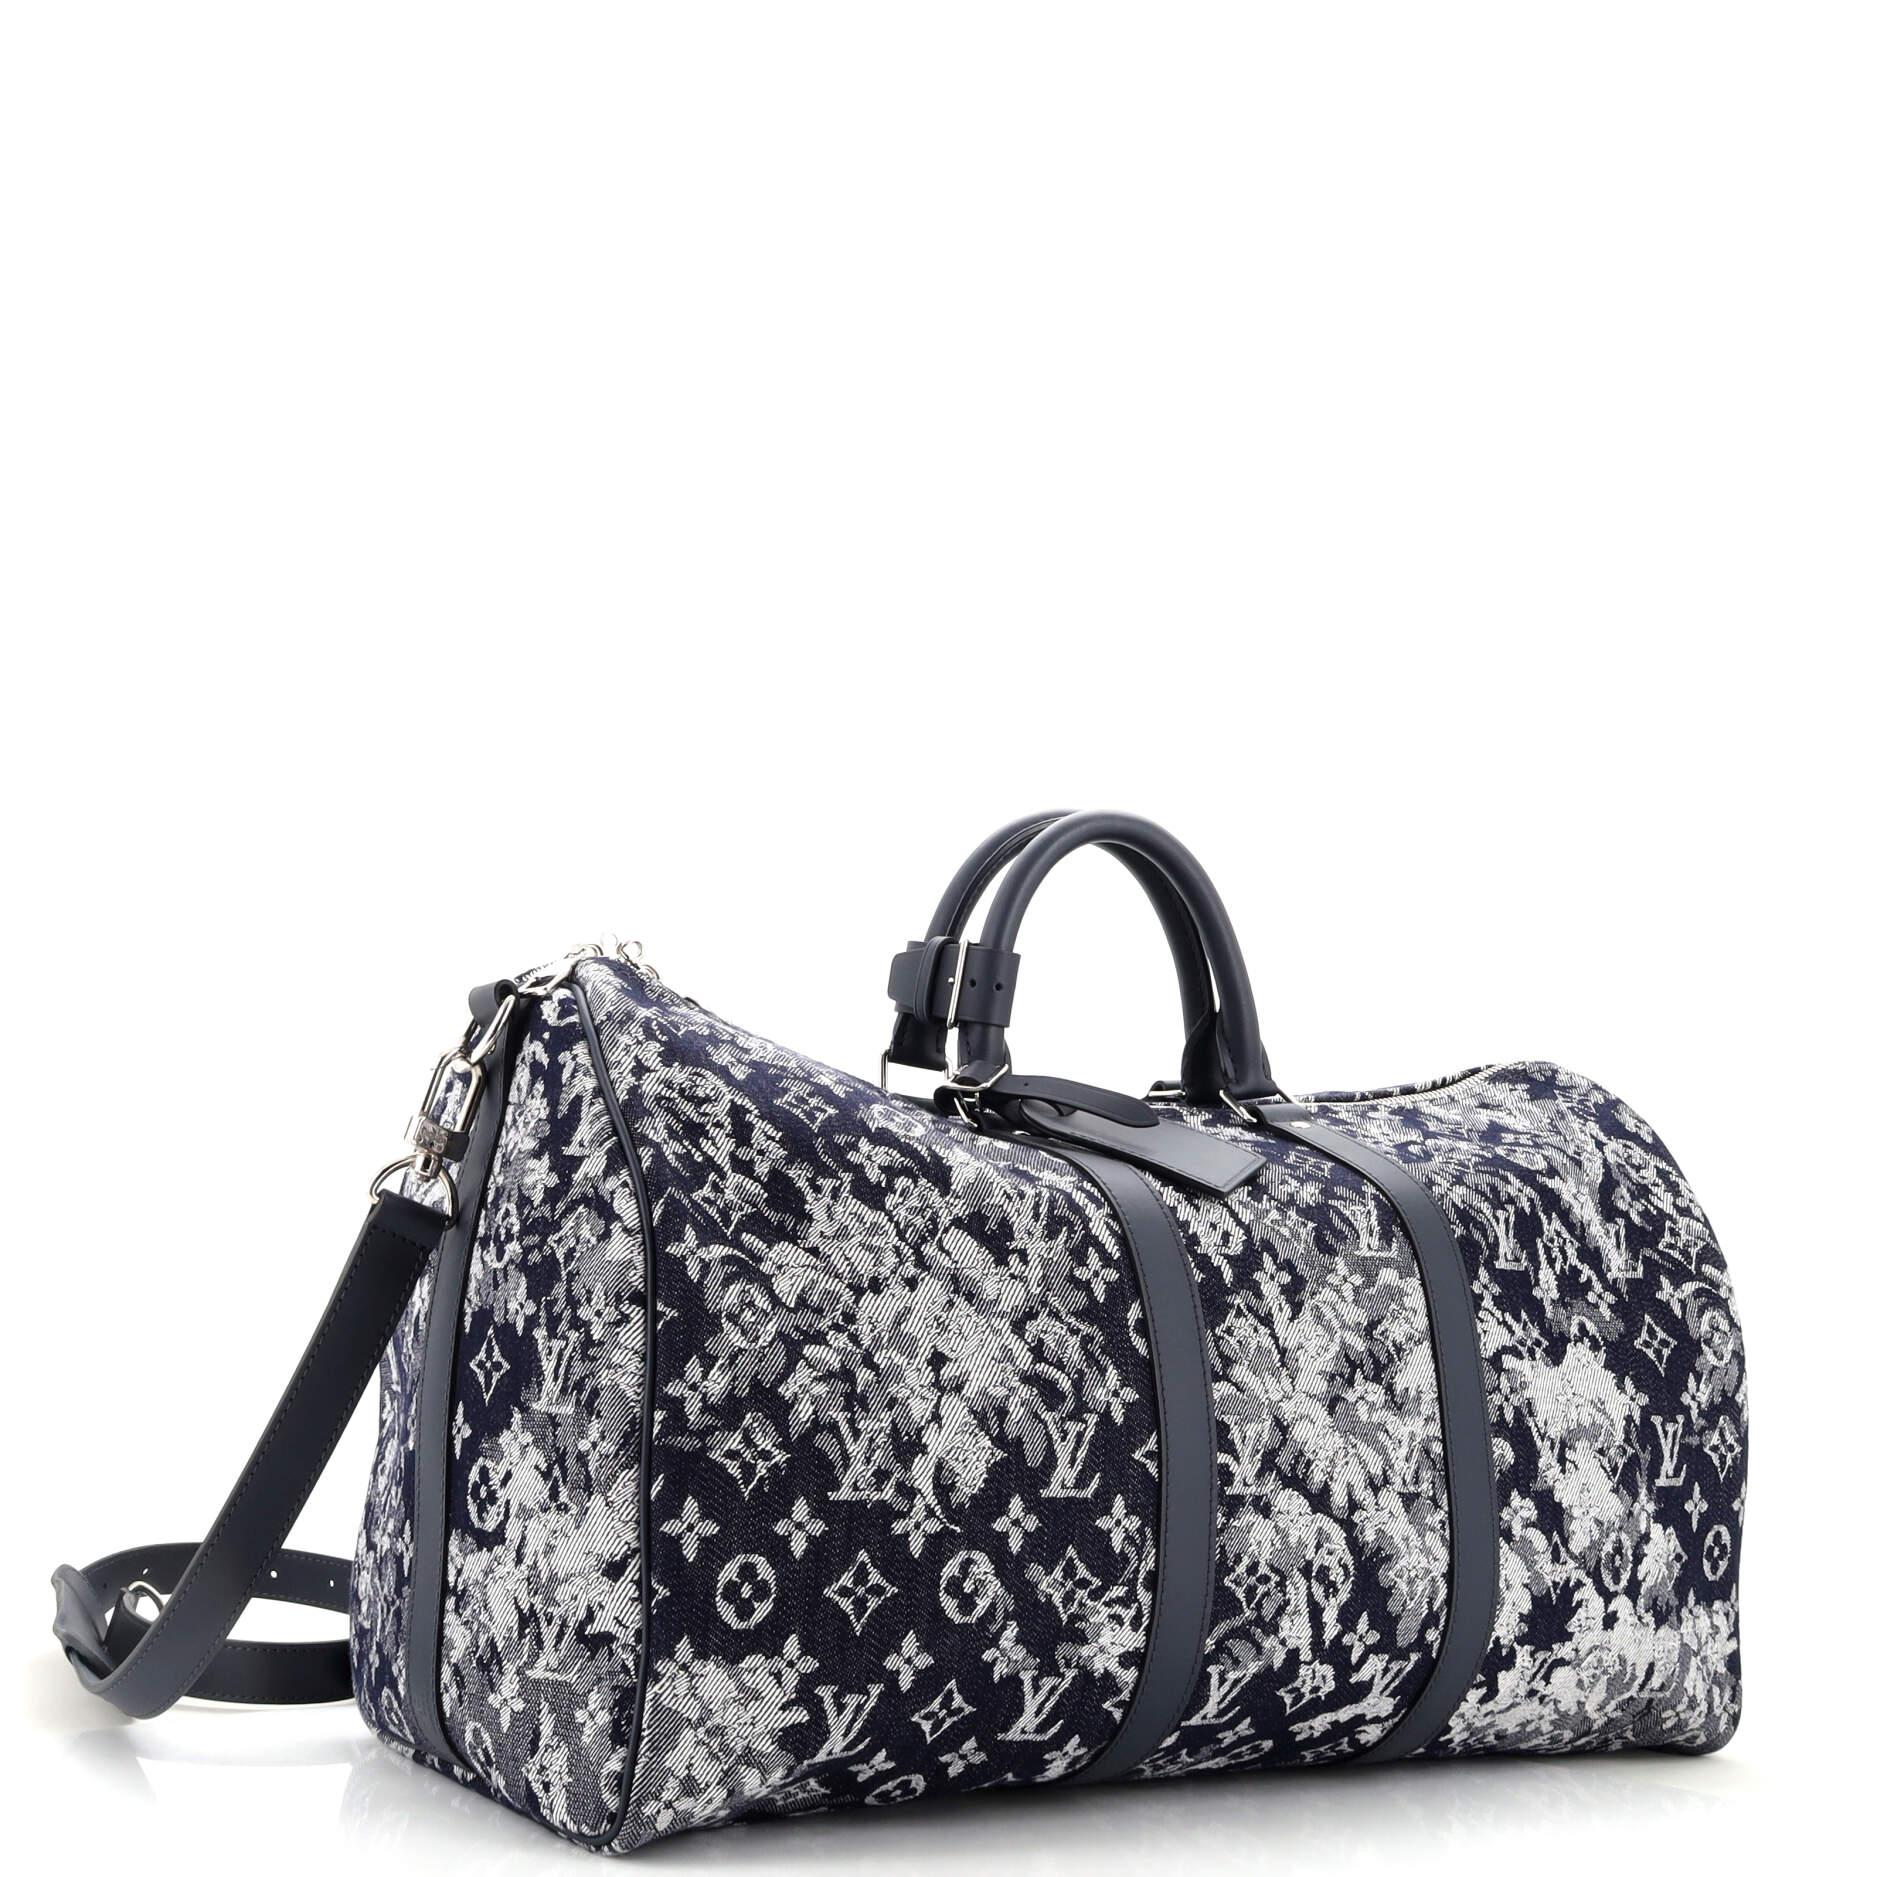 The LV Speedy Bag: A Timeless Tapestry of Luxury and Versatility